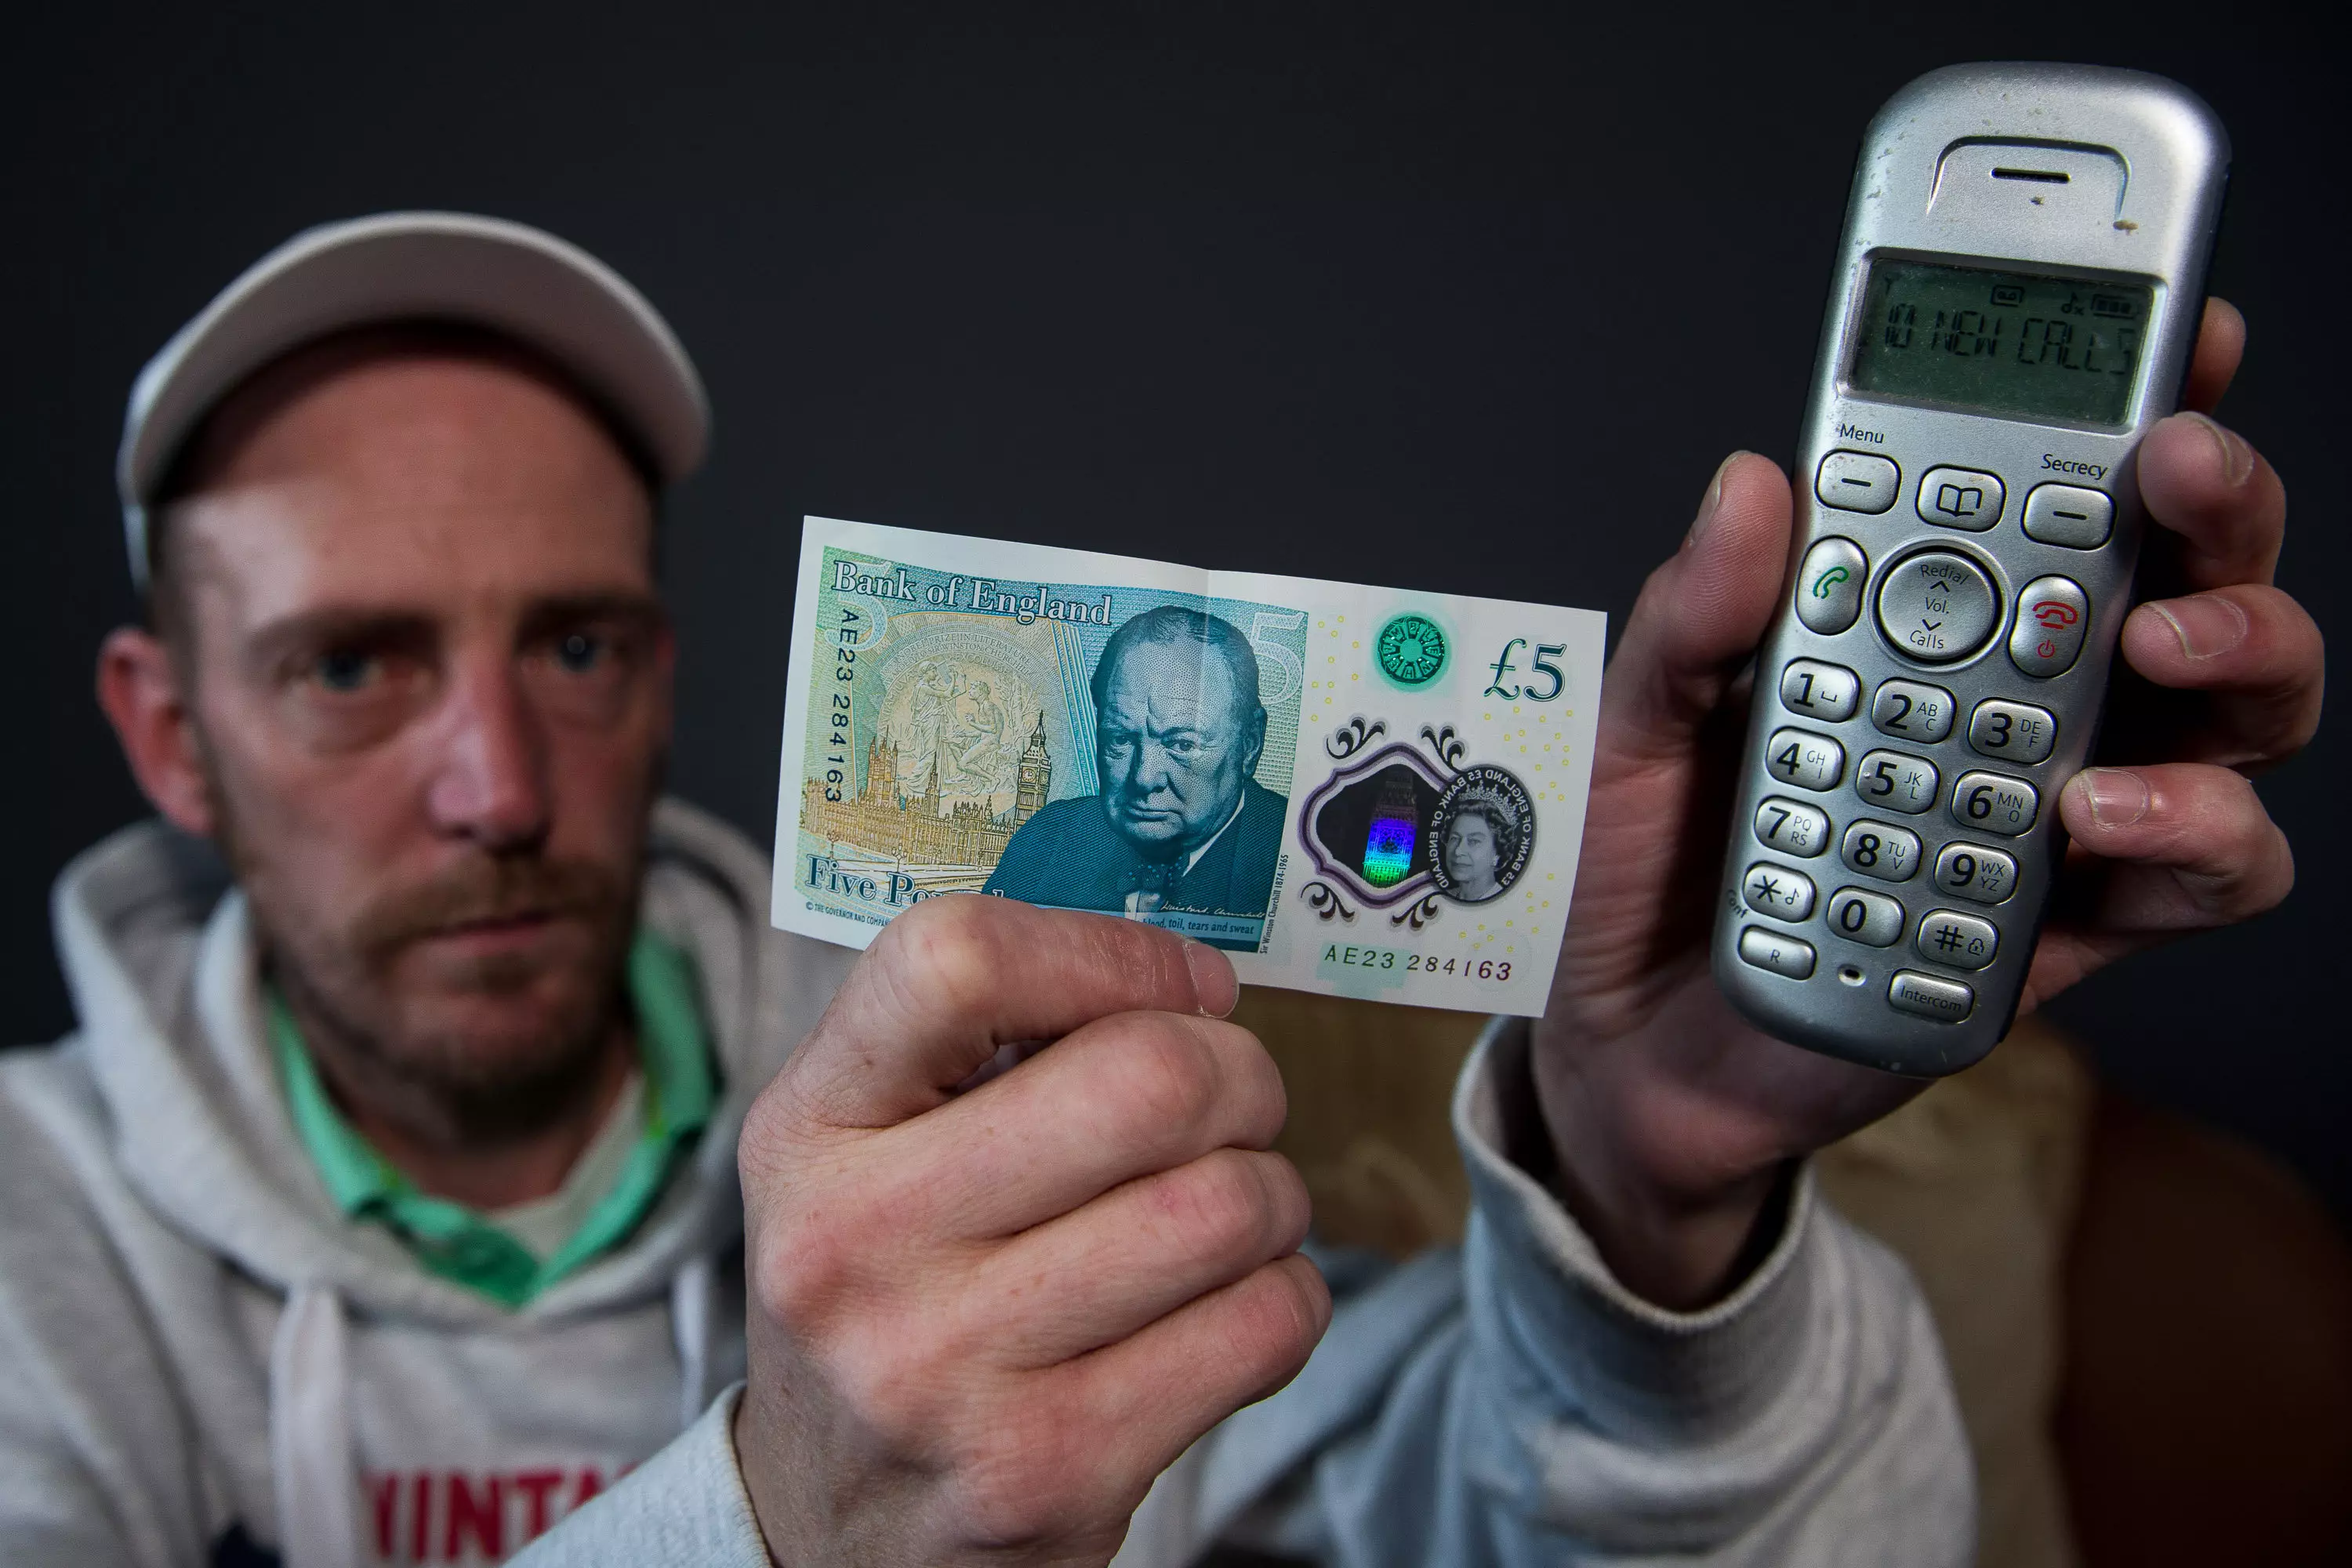 Man Checks Serial Number On New £5 And It's The Same As His Phone Number